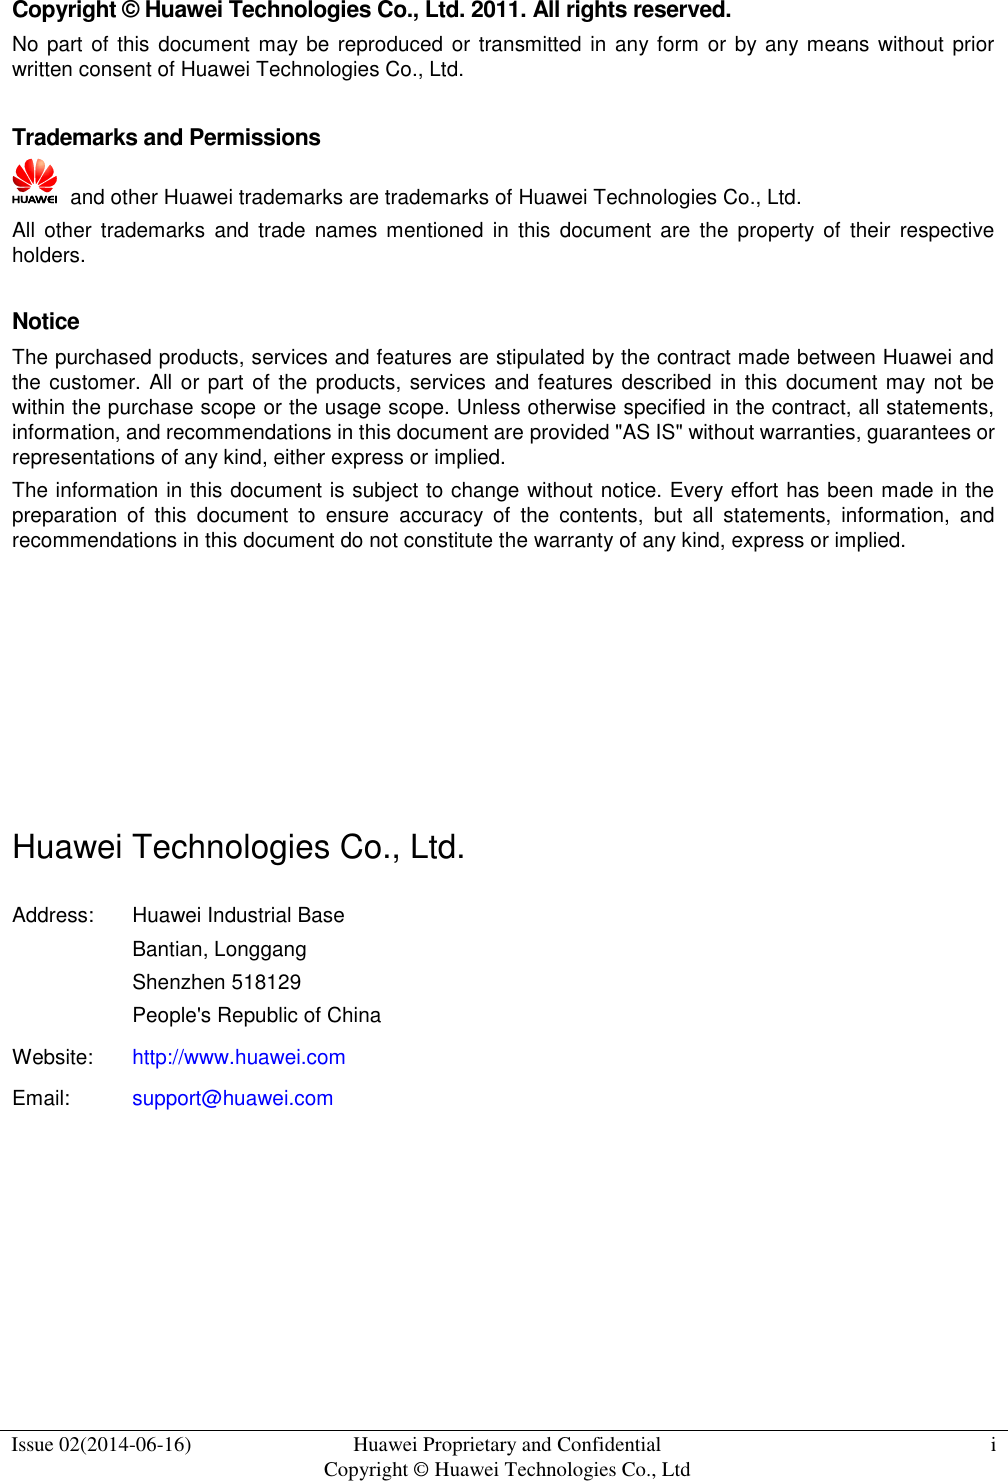  Issue 02(2014-06-16) Huawei Proprietary and Confidential           Copyright © Huawei Technologies Co., Ltd i  Copyright © Huawei Technologies Co., Ltd. 2011. All rights reserved. No part of this  document  may be reproduced or transmitted in any form or by any means without prior written consent of Huawei Technologies Co., Ltd.  Trademarks and Permissions   and other Huawei trademarks are trademarks of Huawei Technologies Co., Ltd. All  other  trademarks  and  trade  names mentioned  in  this  document  are  the  property  of  their  respective holders.  Notice The purchased products, services and features are stipulated by the contract made between Huawei and the customer. All or part of the products, services and features described  in this document may not be within the purchase scope or the usage scope. Unless otherwise specified in the contract, all statements, information, and recommendations in this document are provided &quot;AS IS&quot; without warranties, guarantees or representations of any kind, either express or implied. The information in this document is subject to change without notice. Every effort has been made in the preparation  of  this  document  to  ensure  accuracy  of  the  contents,  but  all  statements,  information,  and recommendations in this document do not constitute the warranty of any kind, express or implied.       Huawei Technologies Co., Ltd. Address: Huawei Industrial Base Bantian, Longgang Shenzhen 518129 People&apos;s Republic of China Website: http://www.huawei.com Email: support@huawei.com     